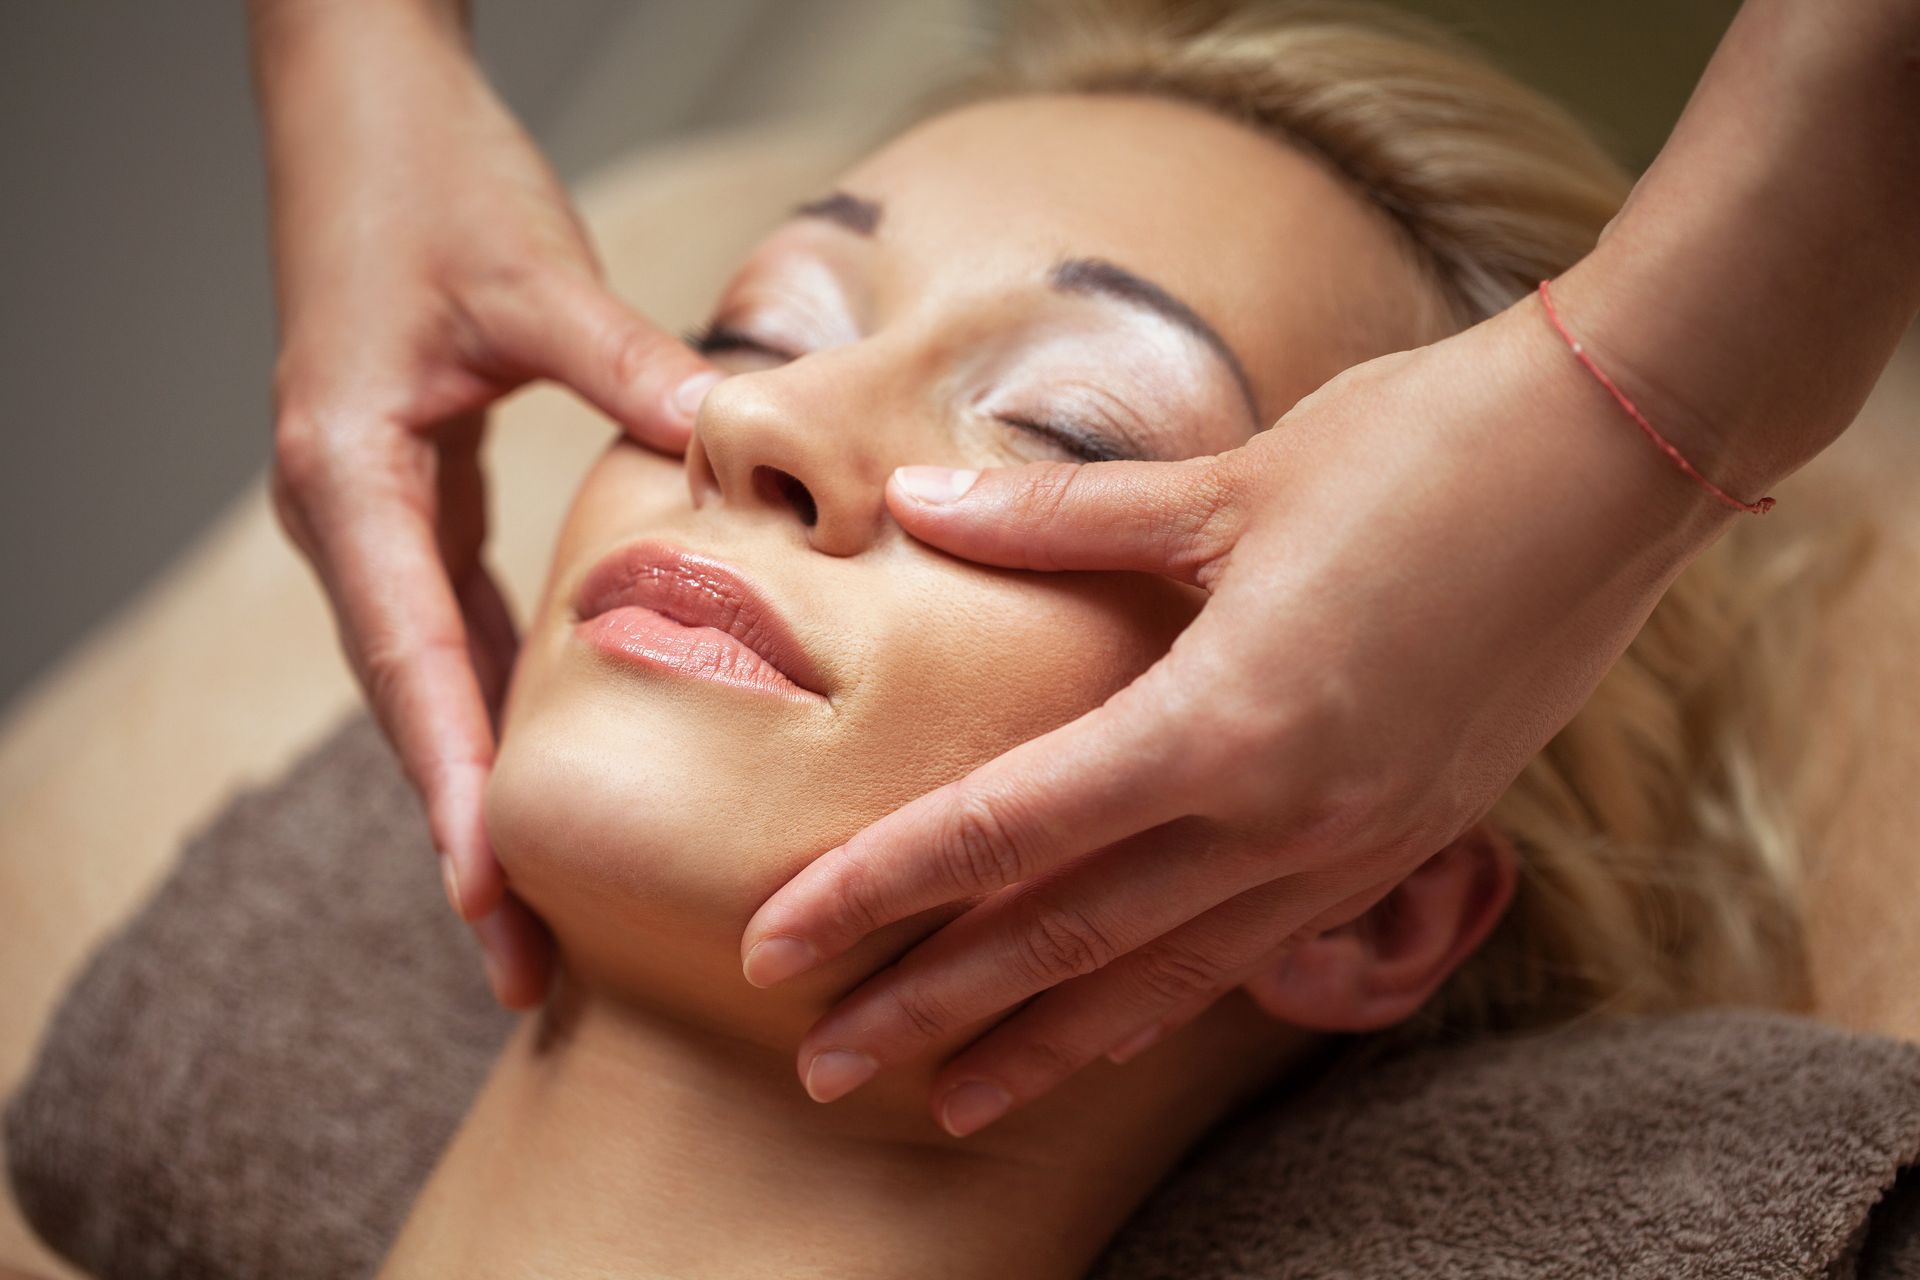 a woman is getting a facial massage at a spa .